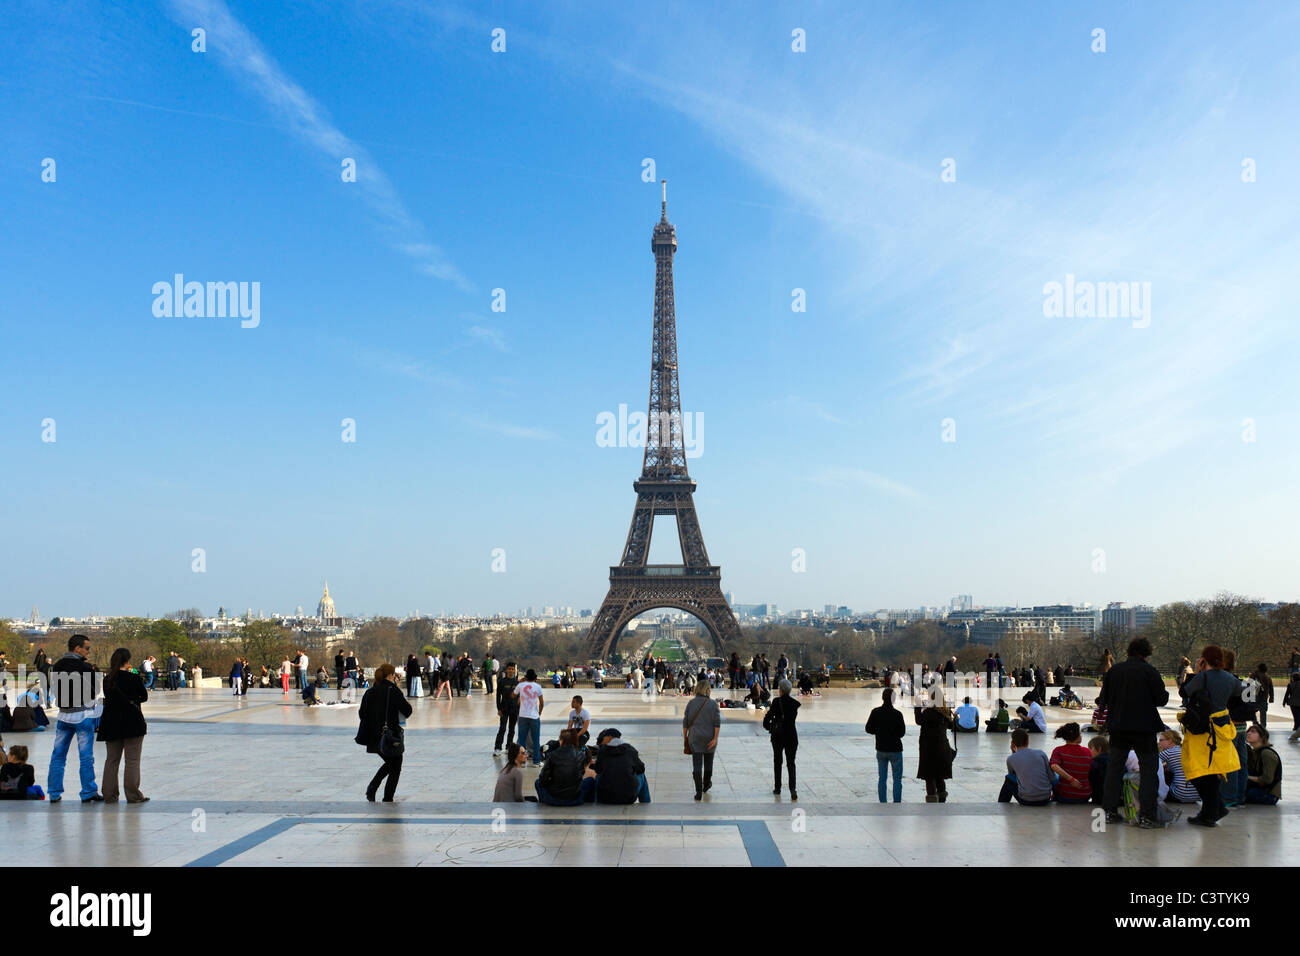 Tourists viewing the Eiffel Tower from the Trocadero in the late afternoon, Paris, France Stock Photo